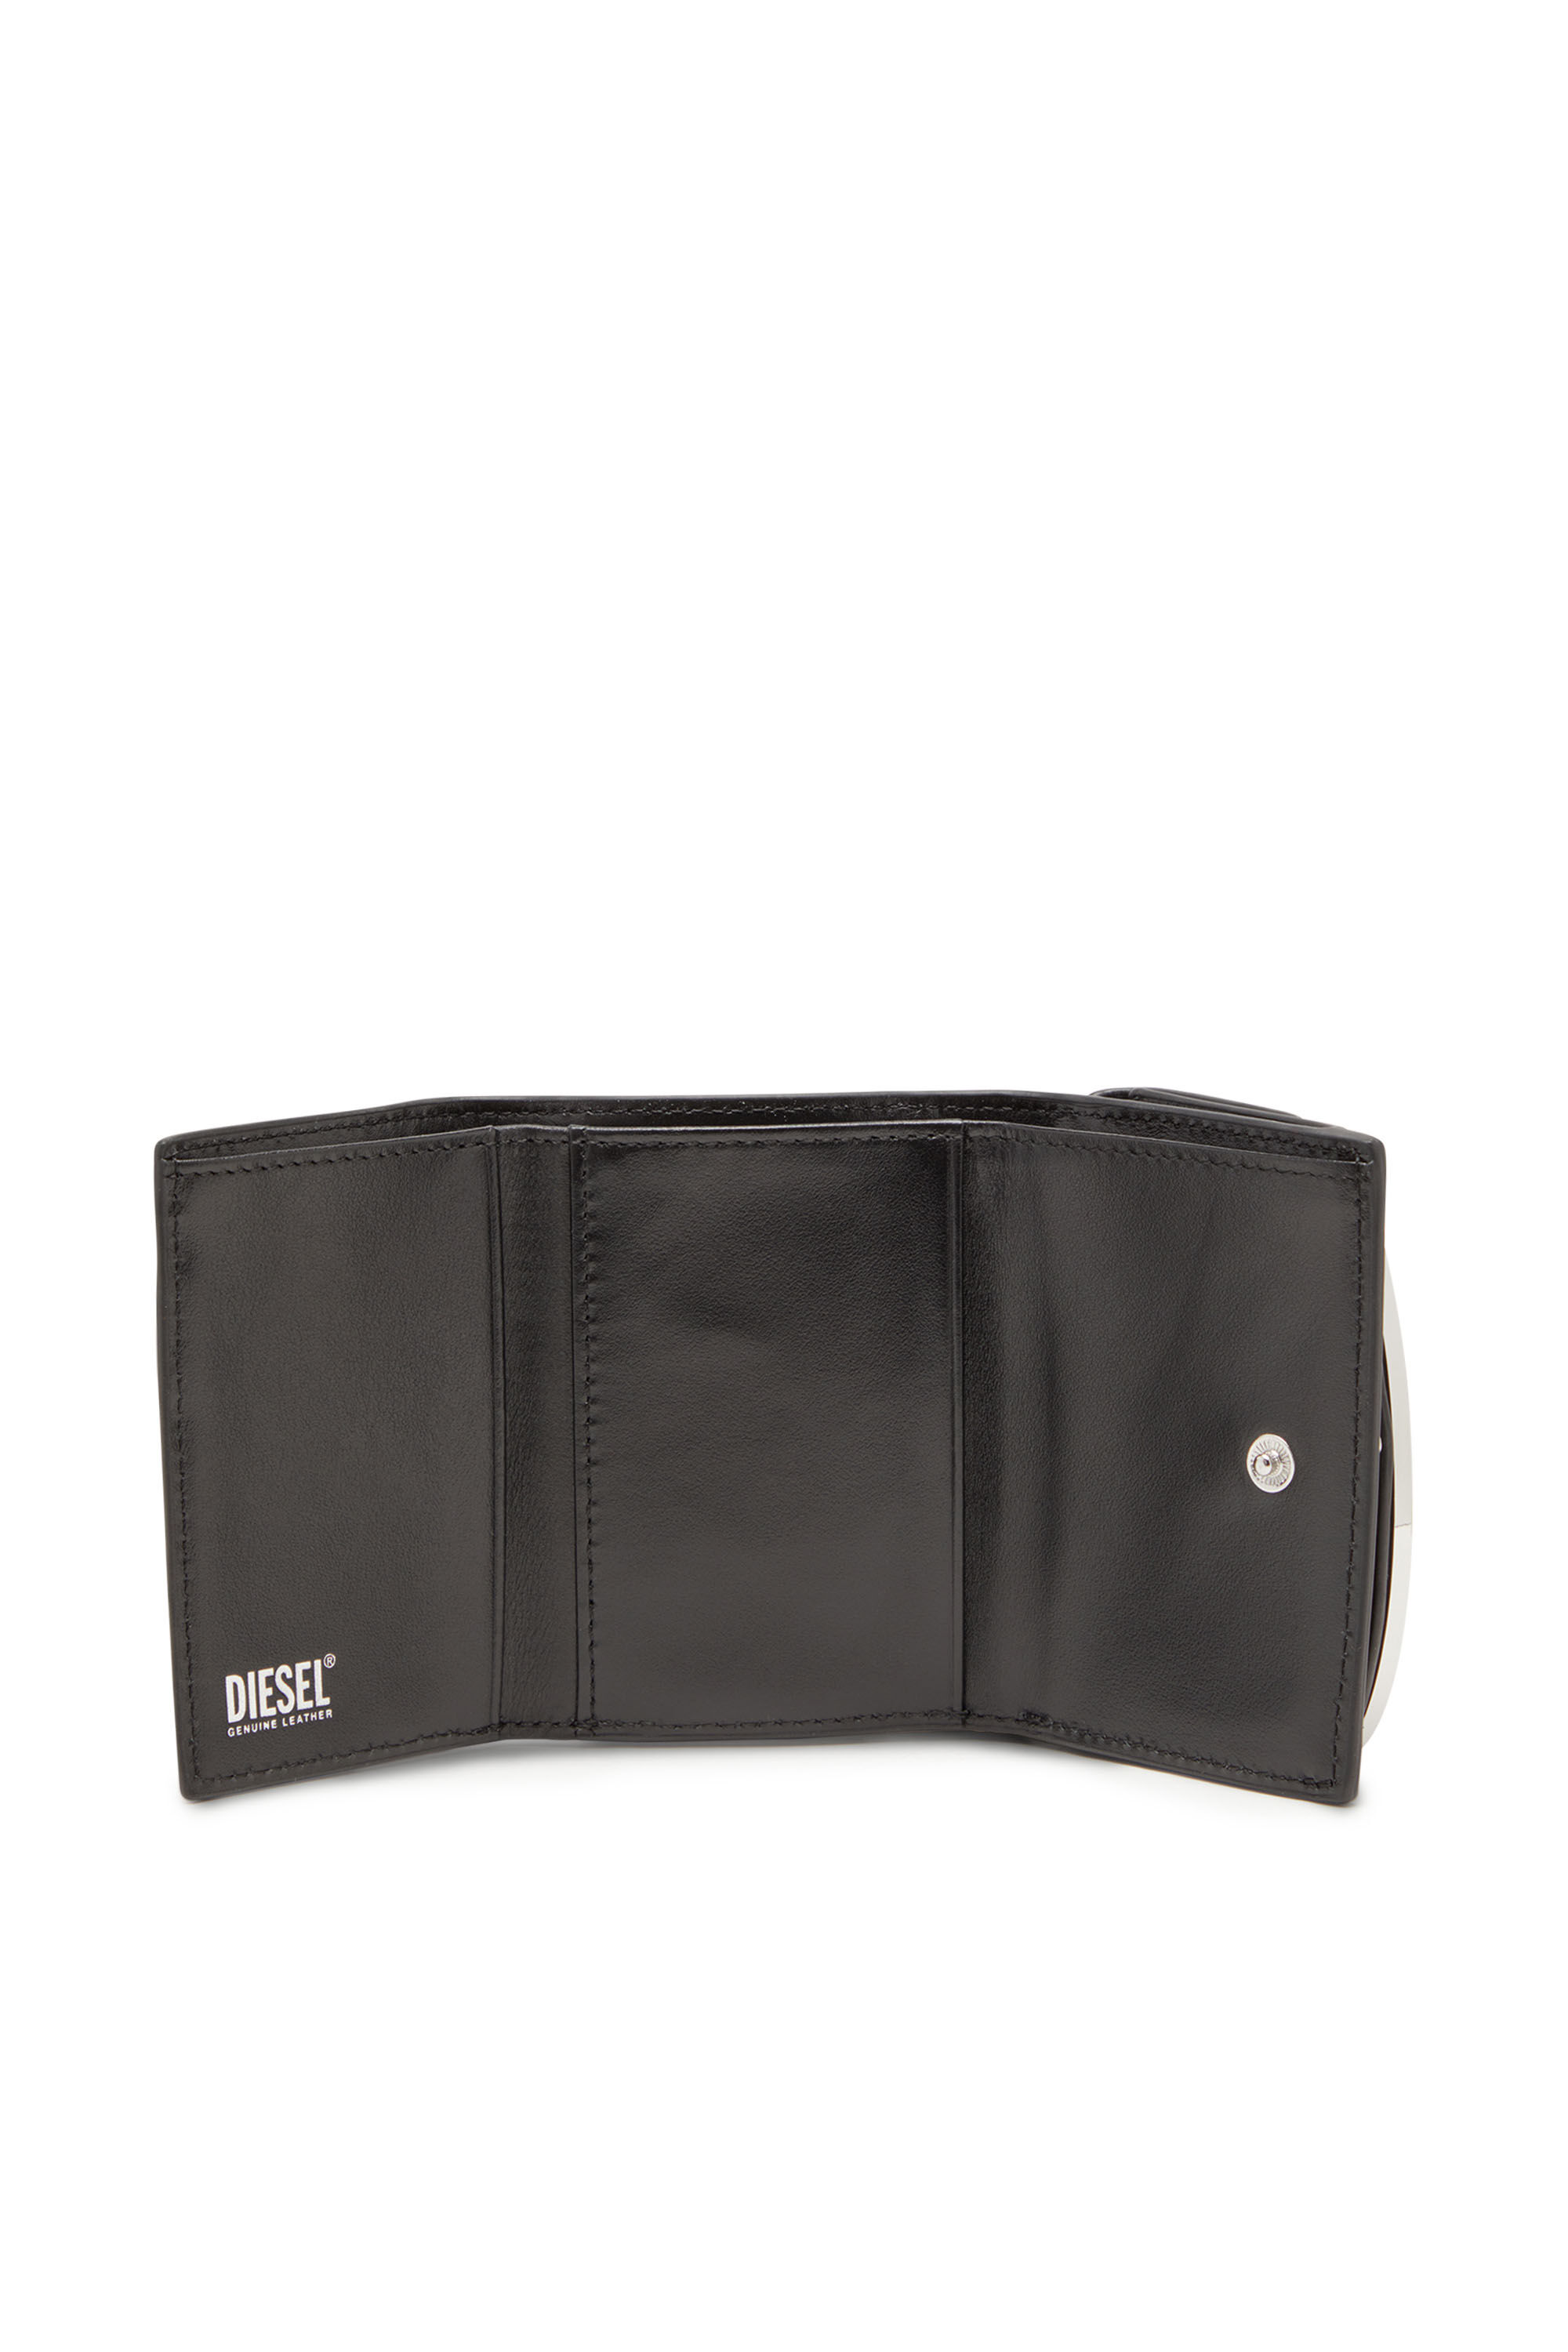 Diesel - 1DR TRI FOLD COIN XS II, Woman Tri-fold wallet in leather in Black - Image 3